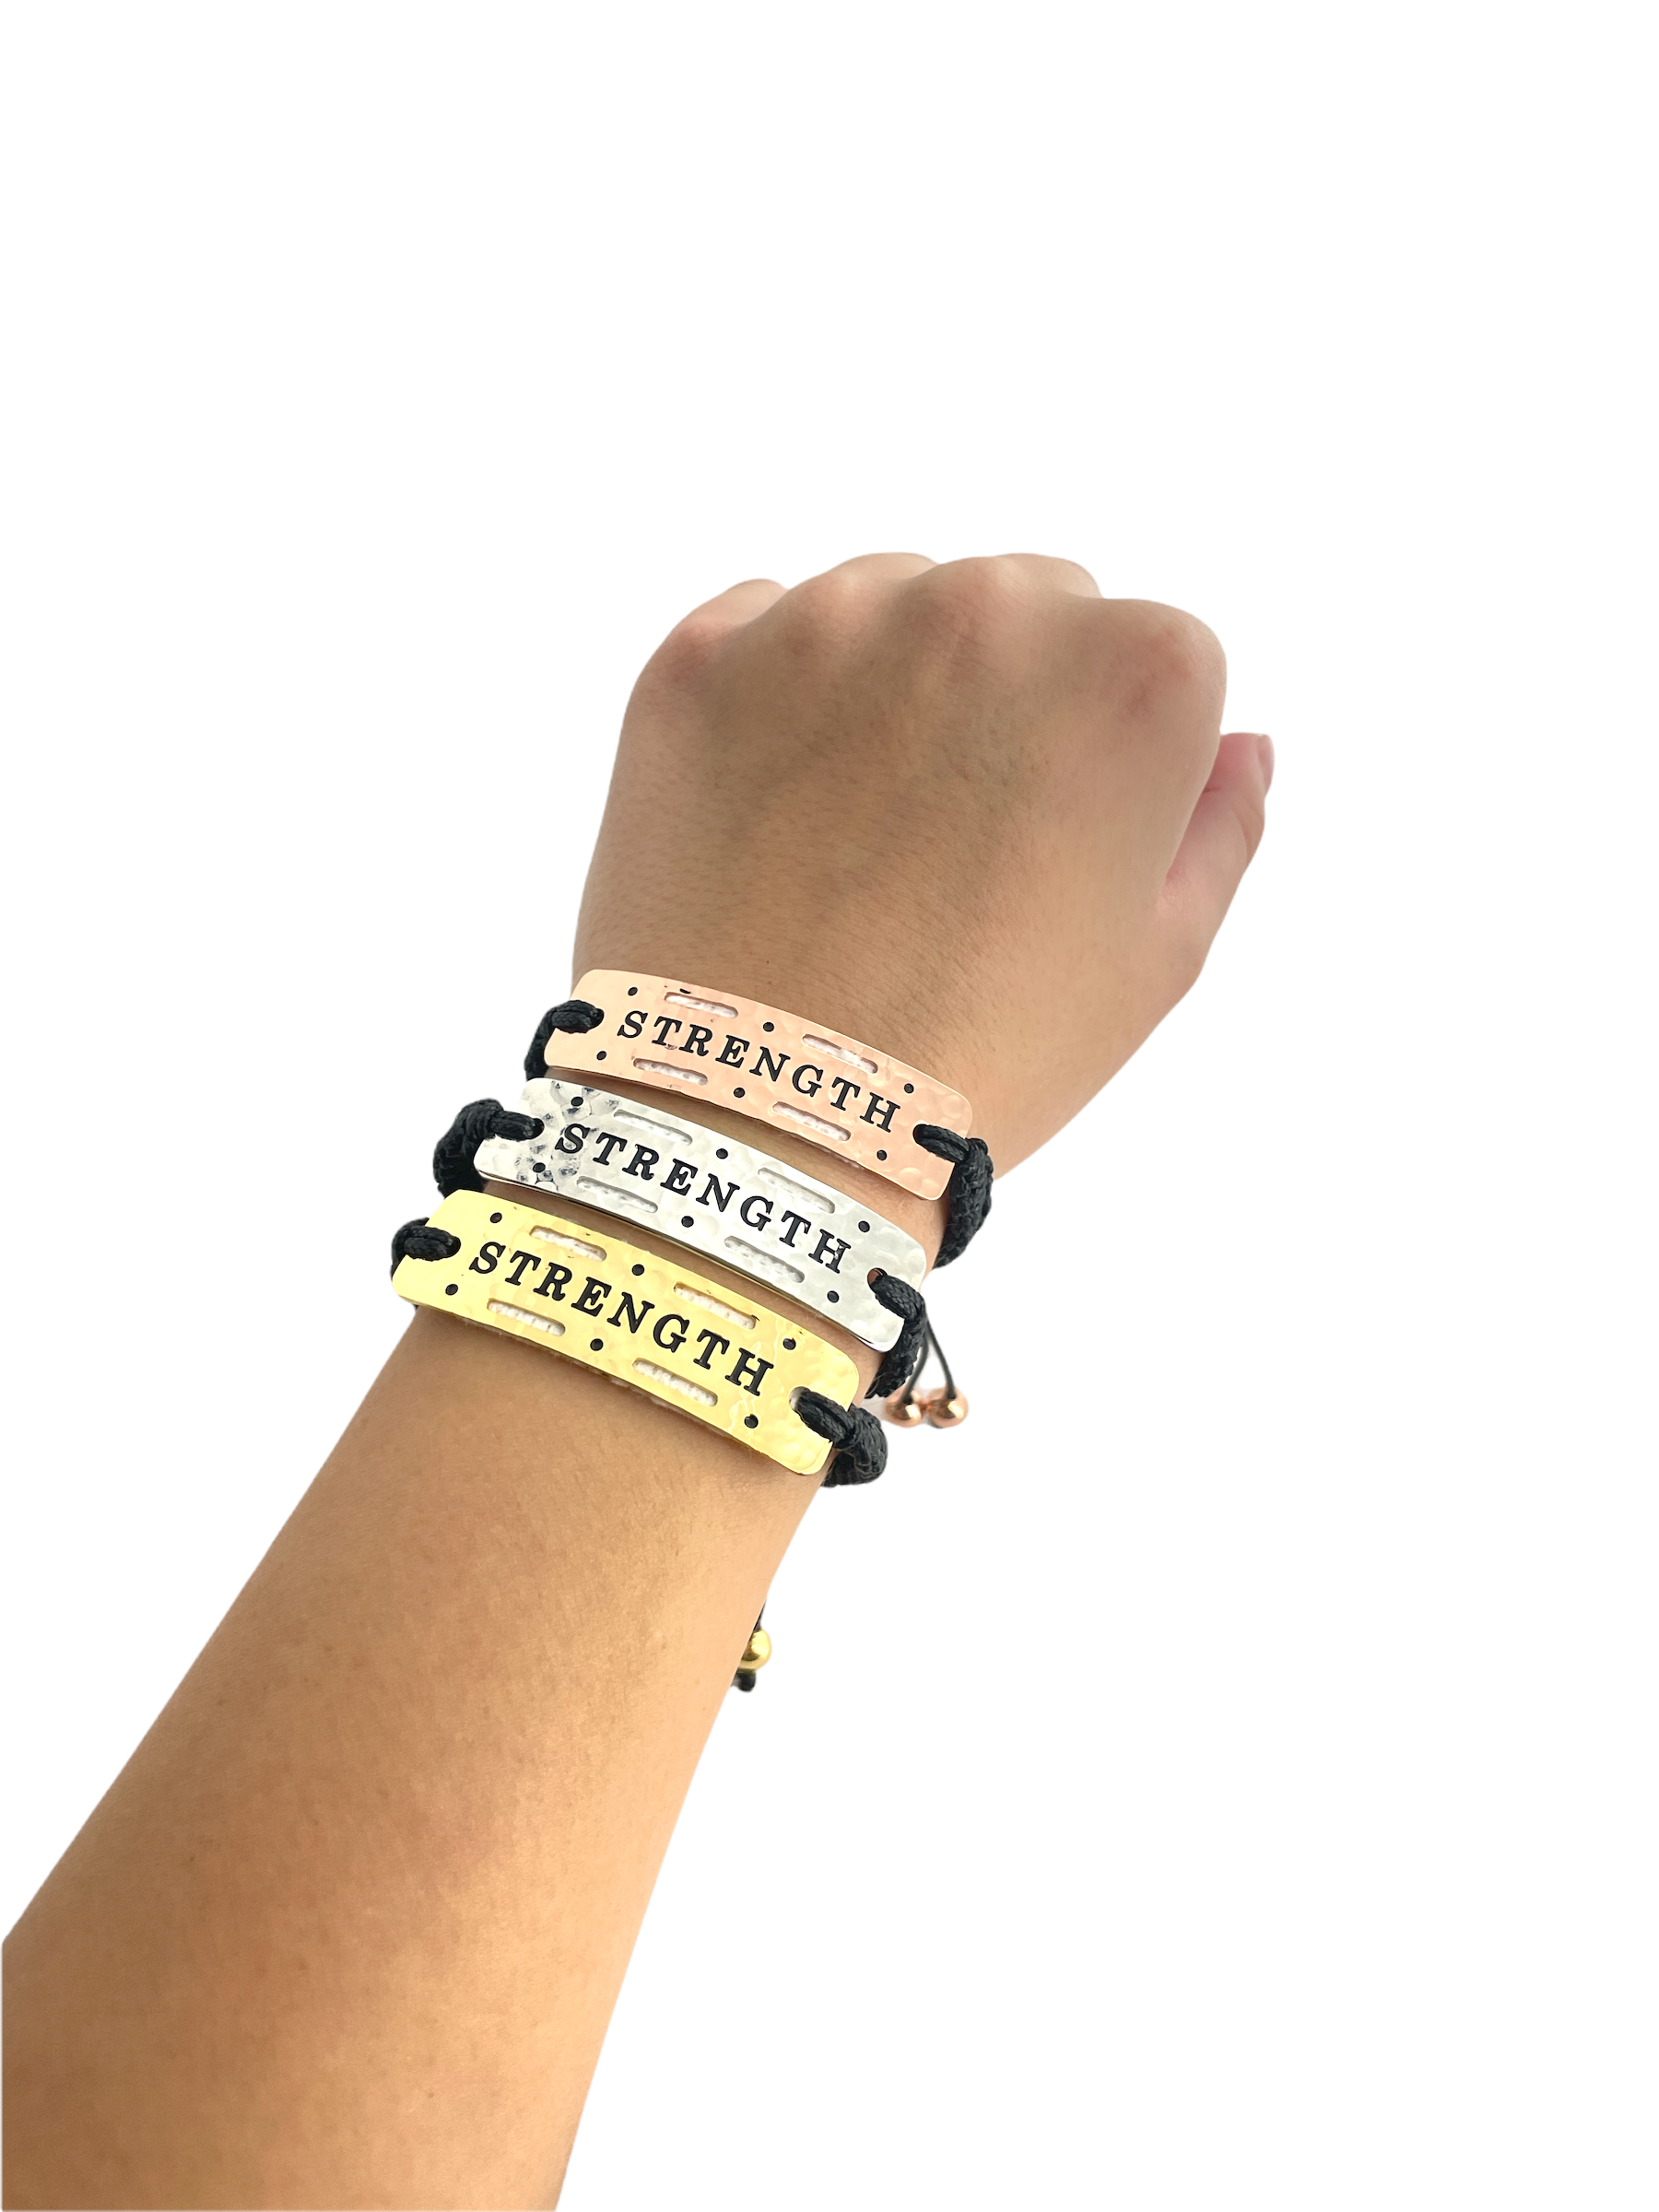 Strength - Vented Power Word Aromatherapy Diffuser Bracelet